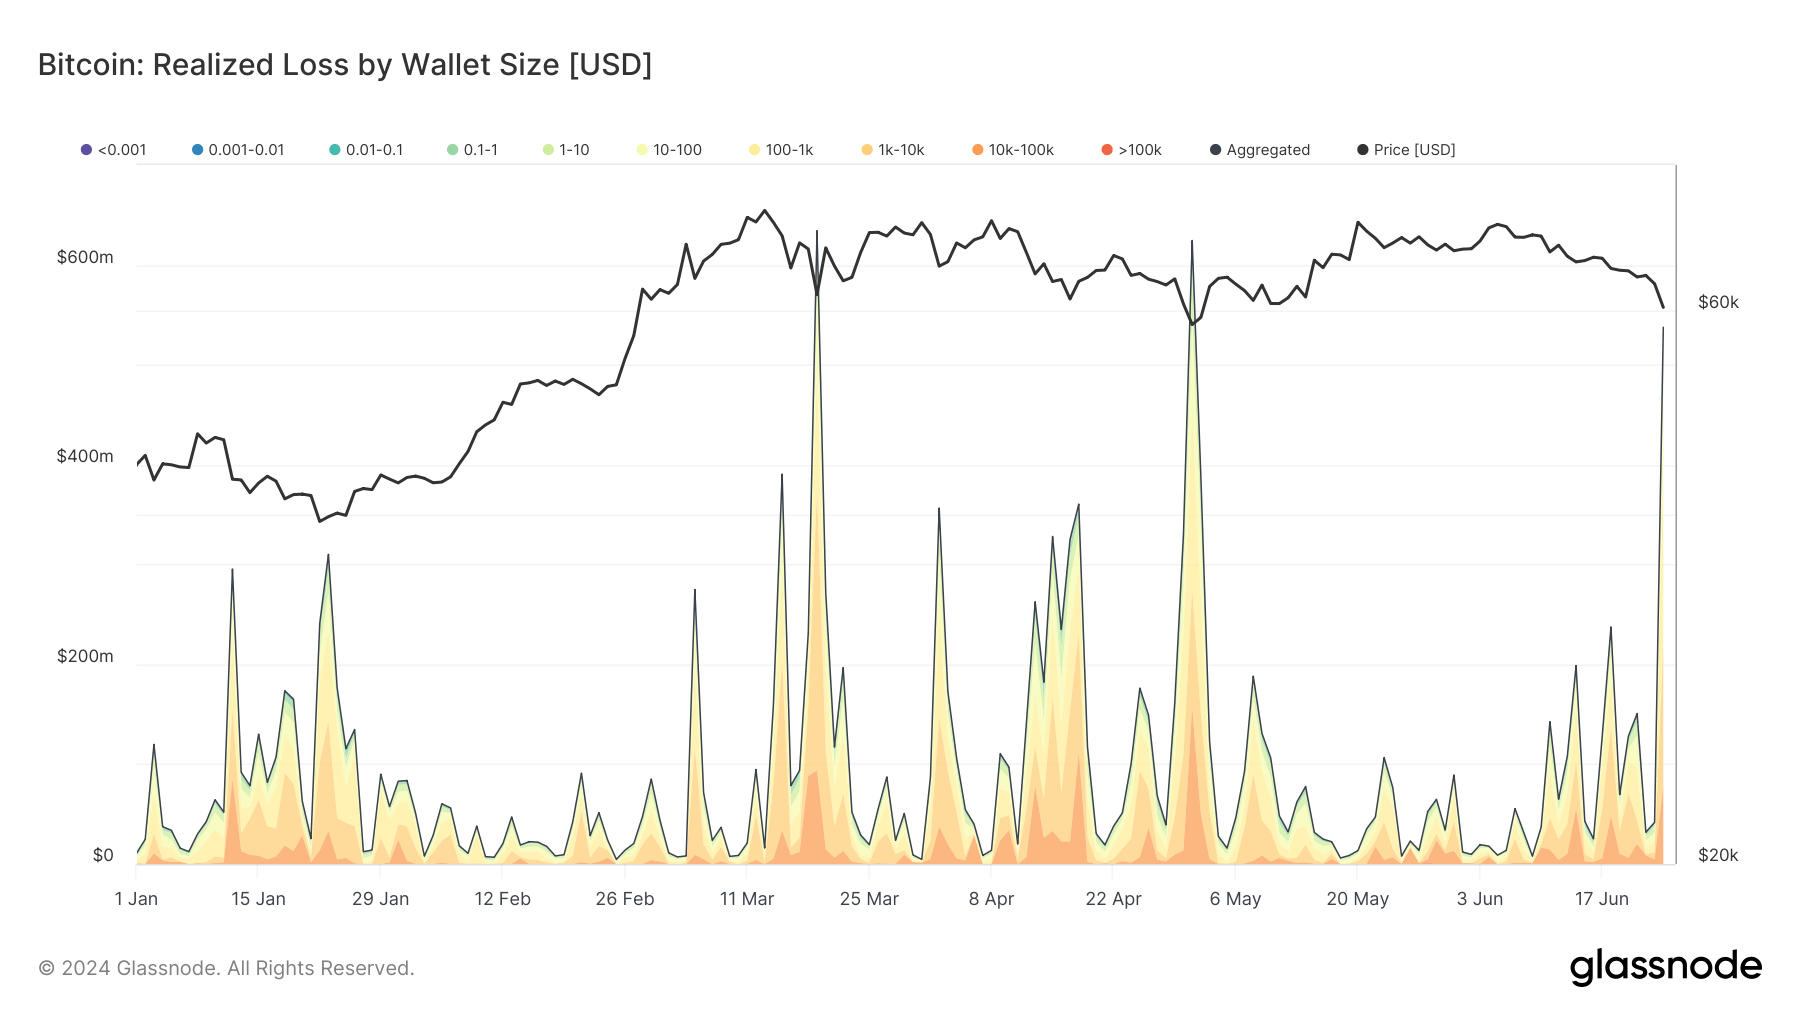 Bitcoin Realized Loss by Wallet Size: (Source: Glassnode)